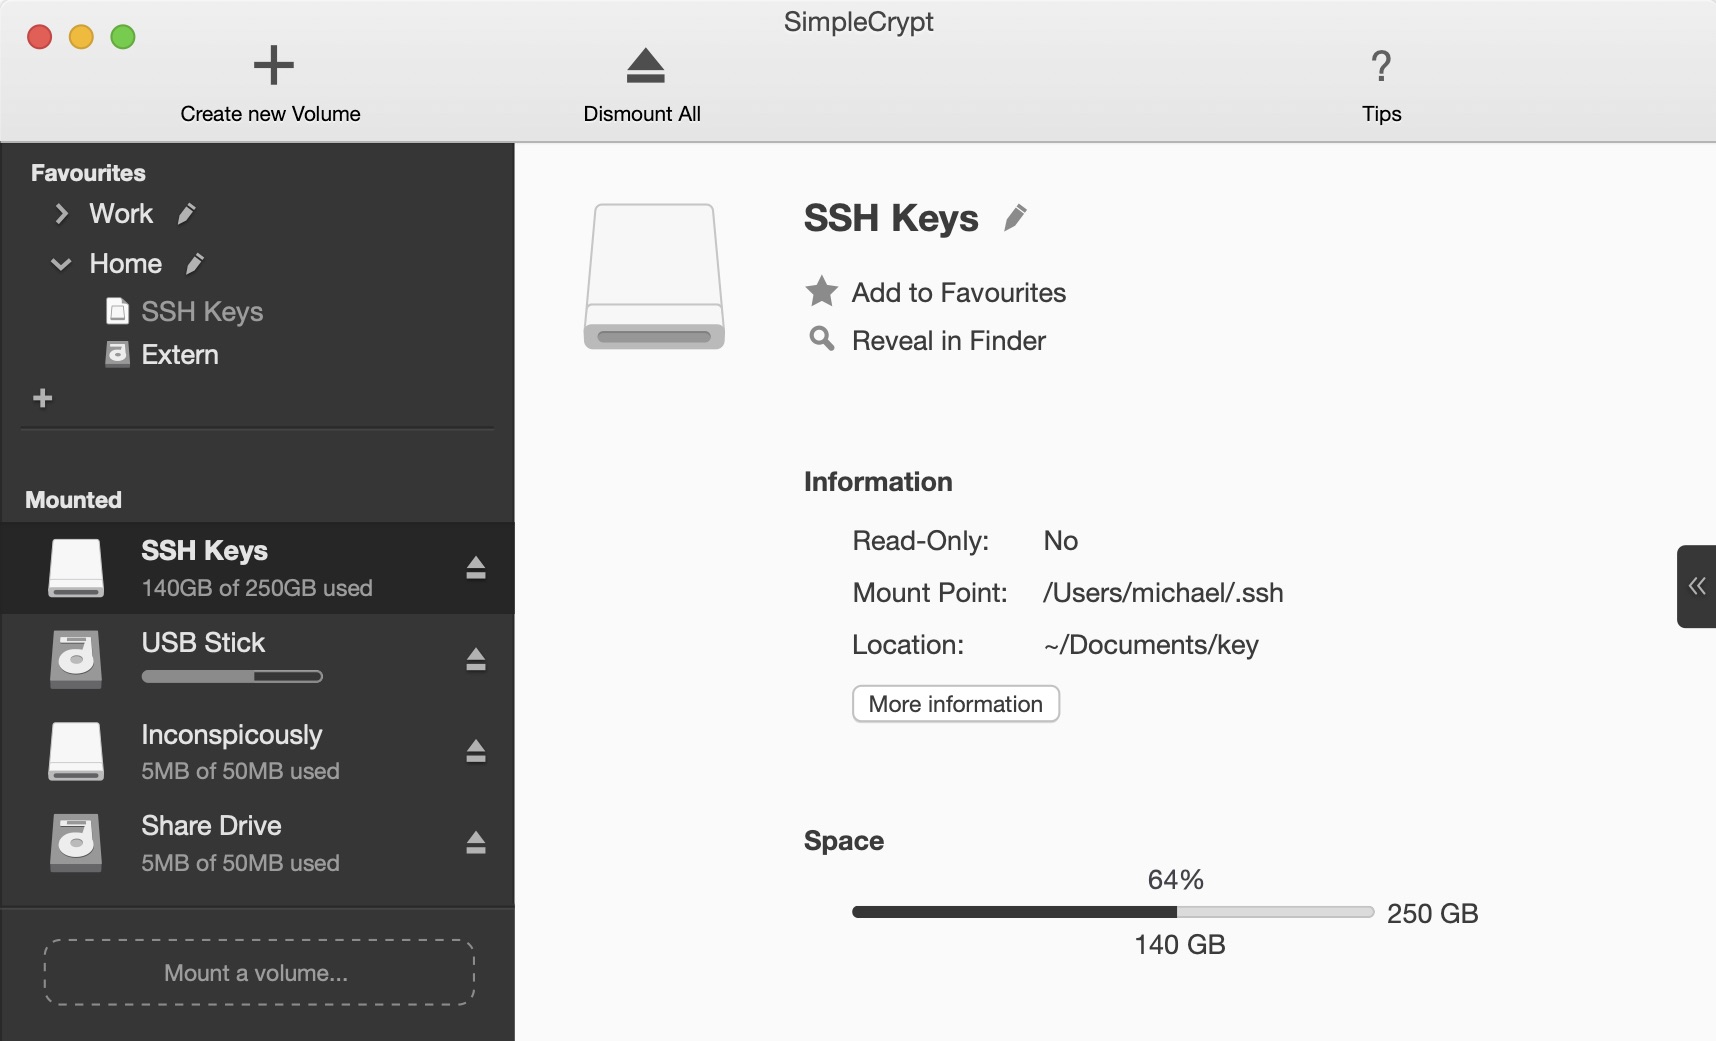 Main window interface of SimpleCrypt, featuring a master-detail view where users can select mounted Disks and Disk Images.